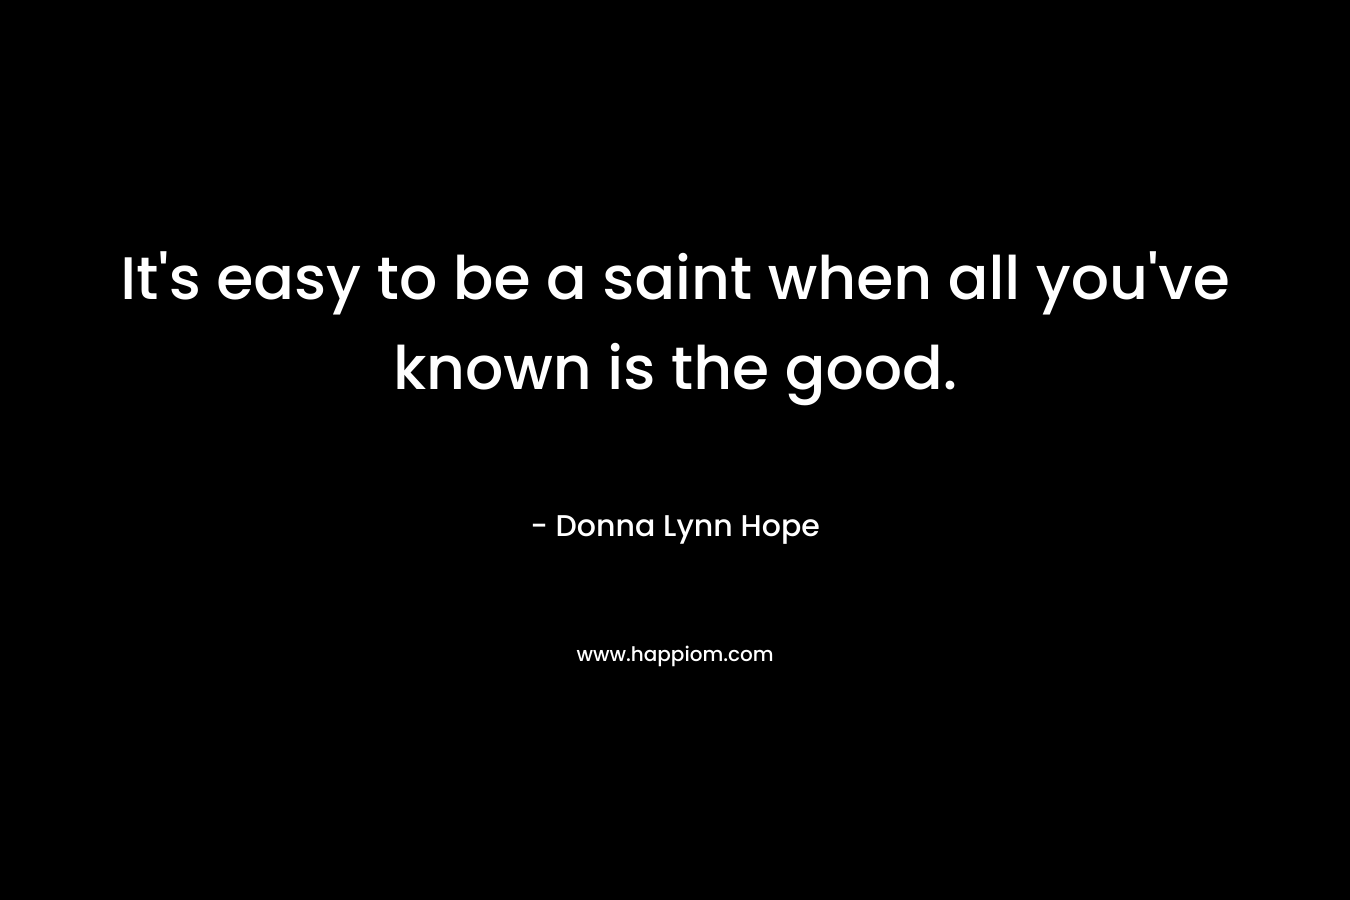 It's easy to be a saint when all you've known is the good.